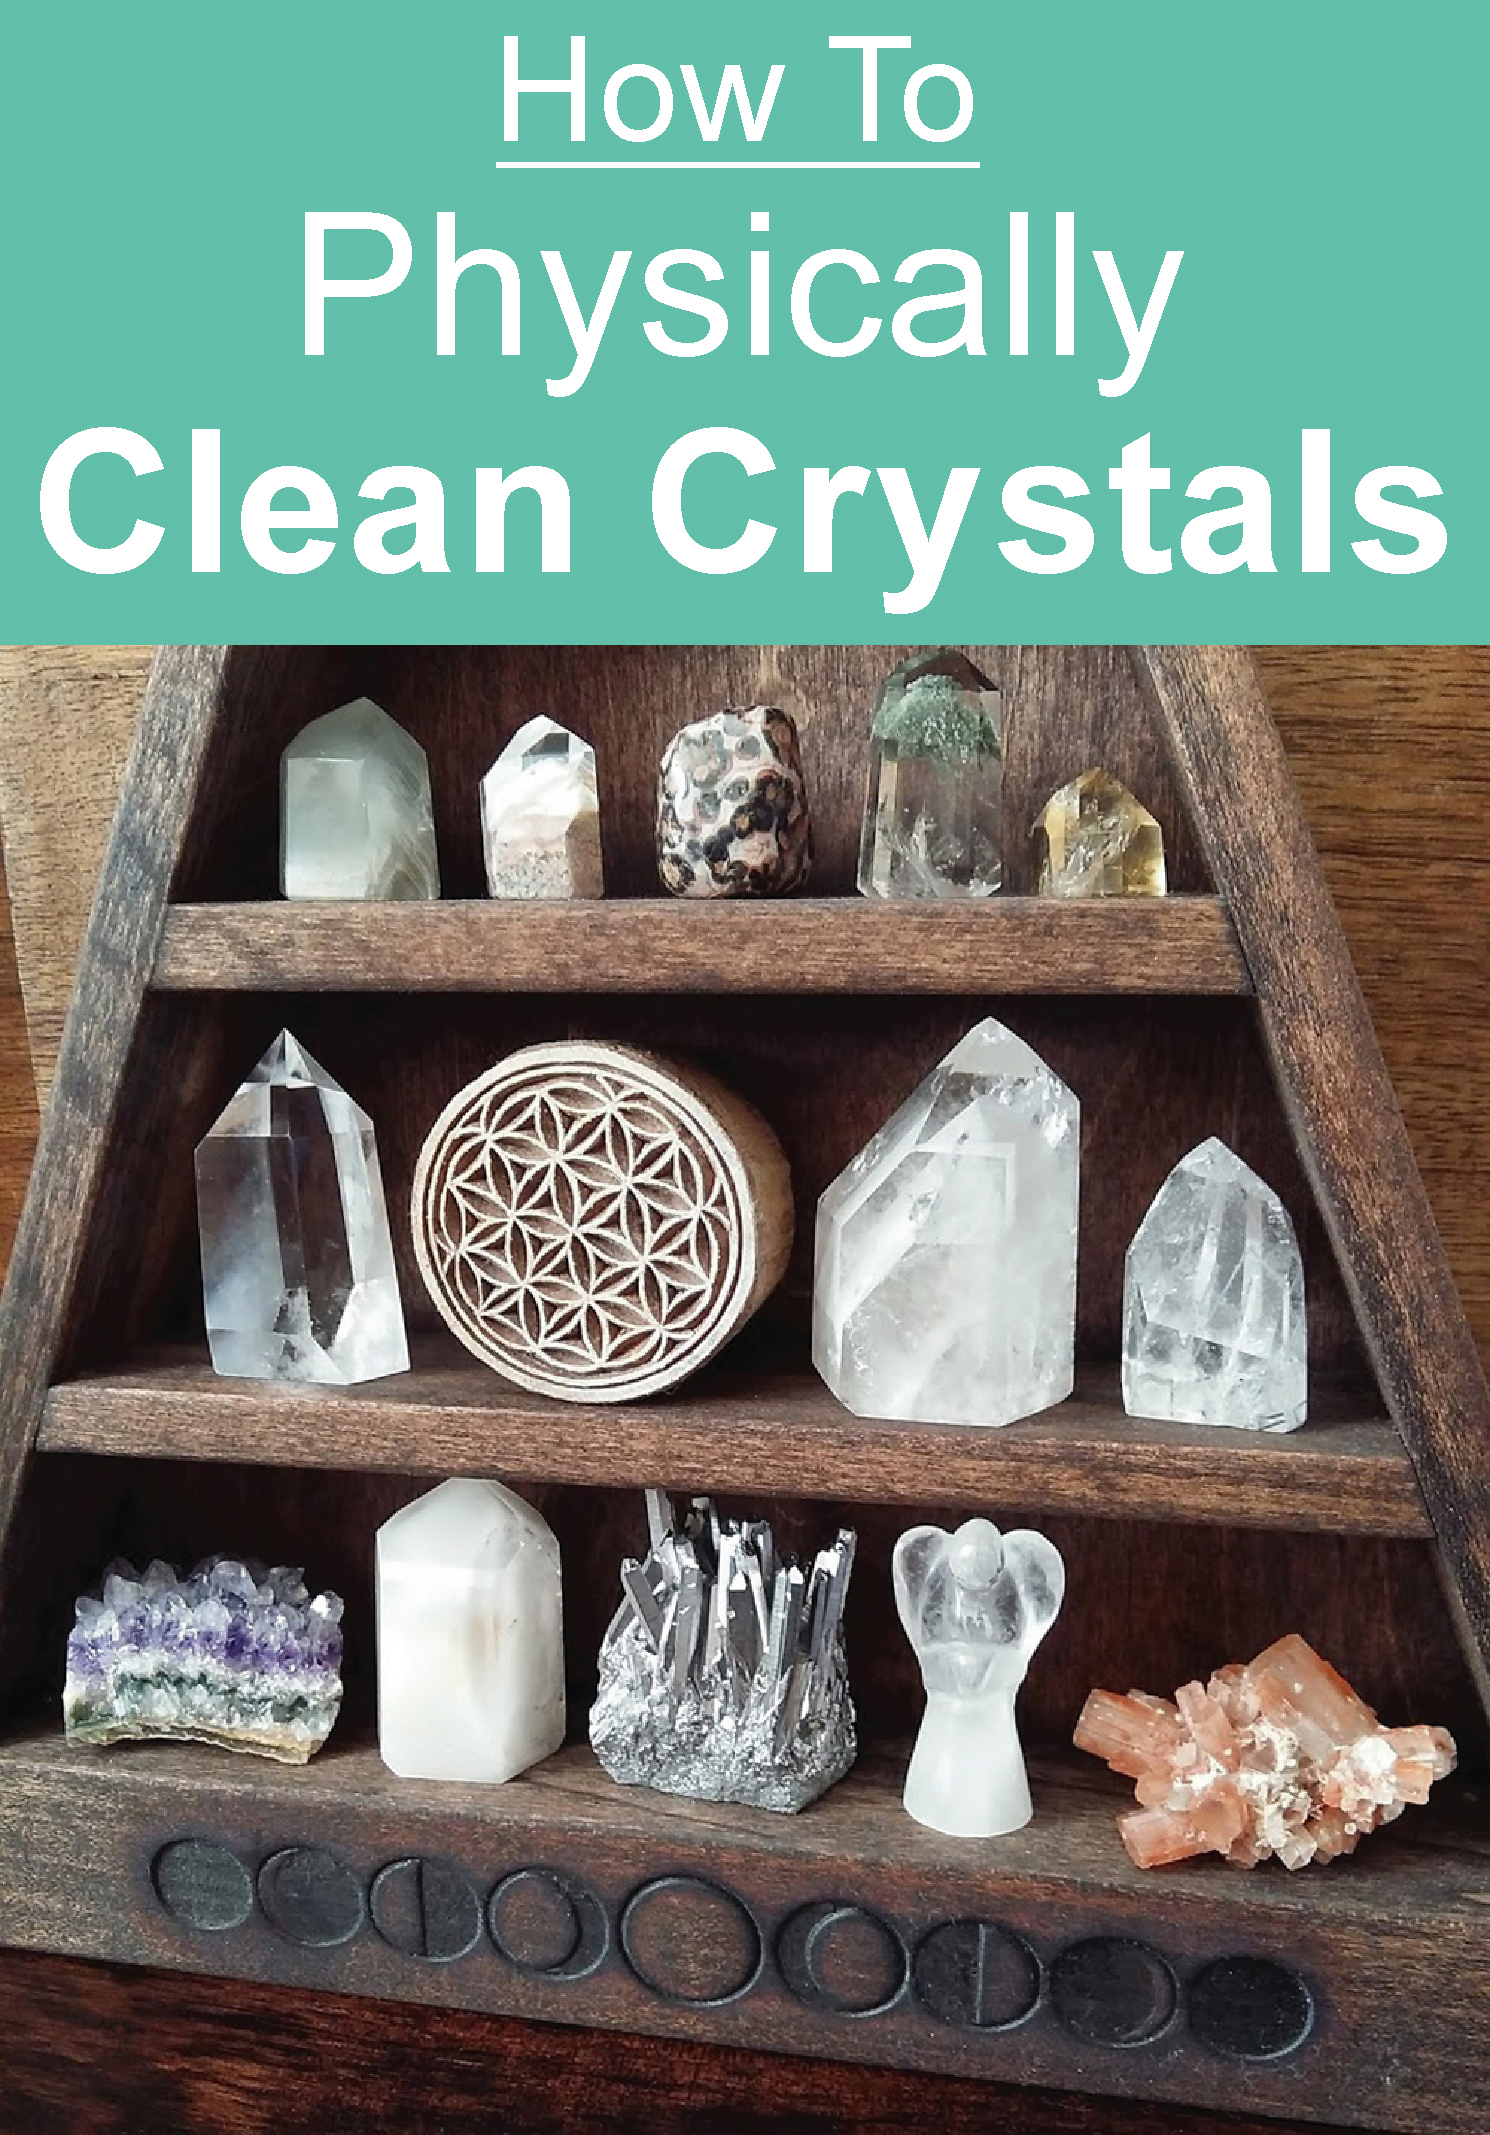 Learn How To Physically Clean Crystals and keep them free of dust and dirt